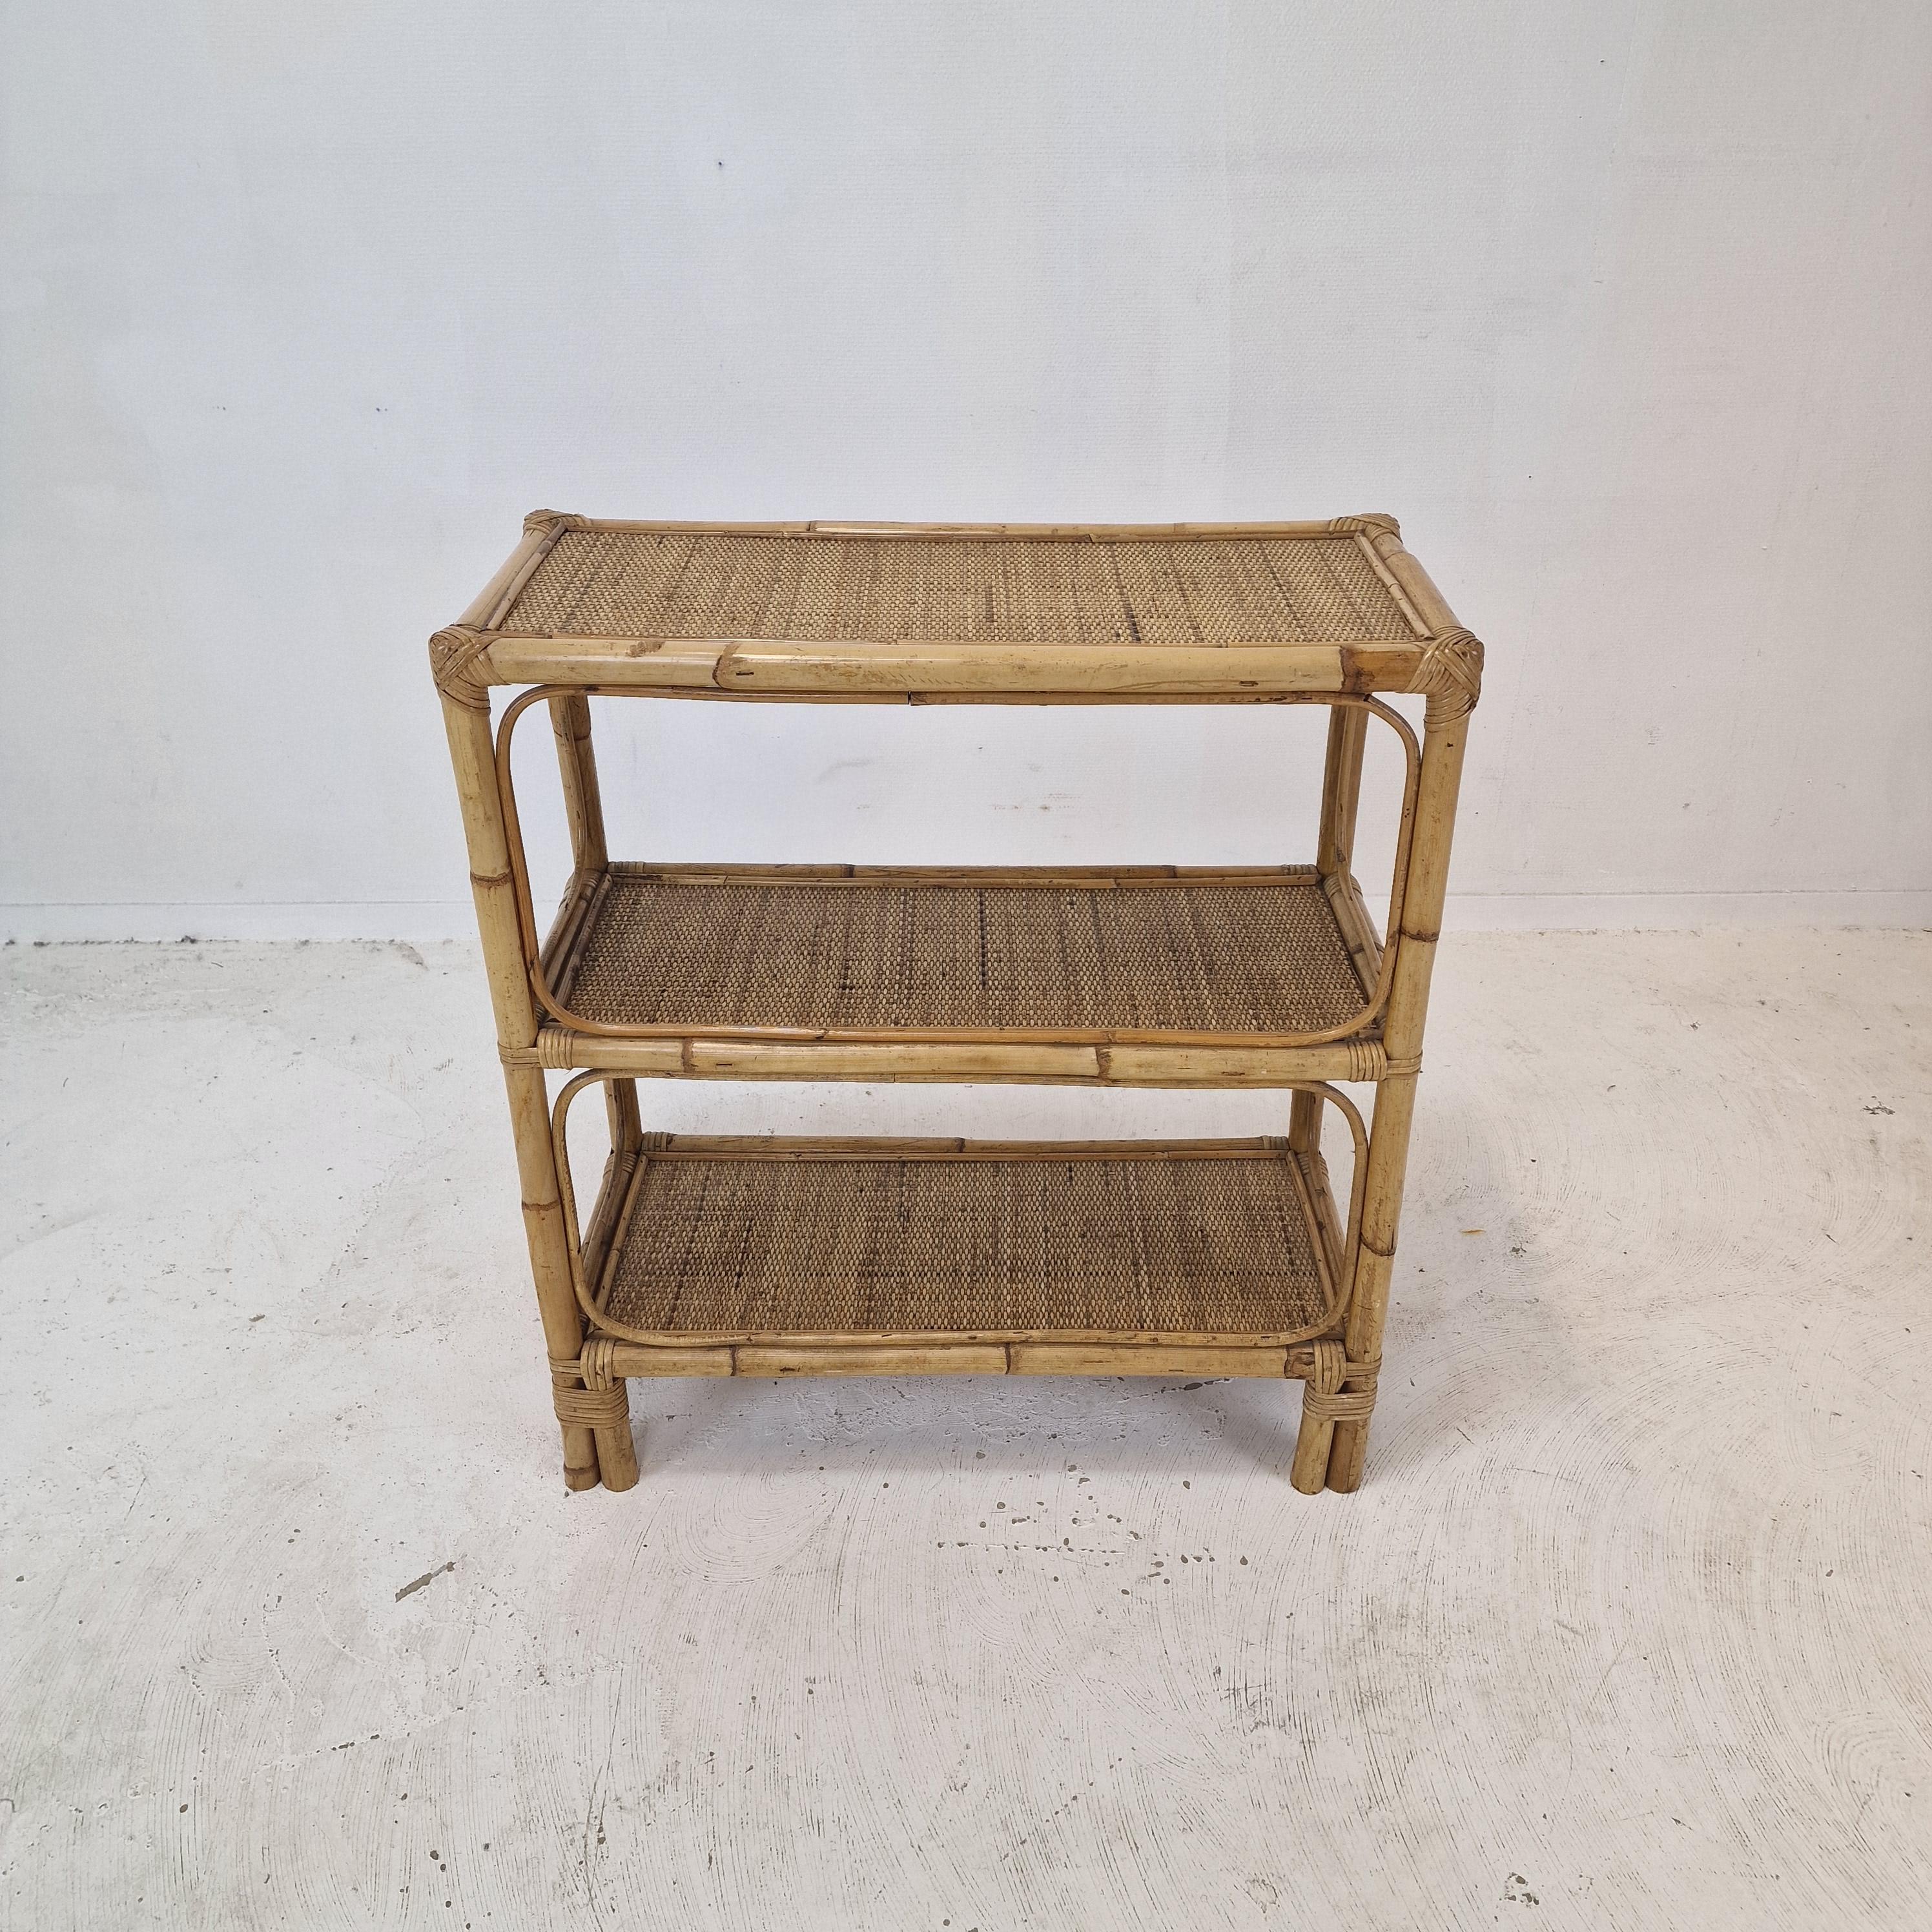 Hand-Crafted Italian Bamboo and Rattan Credenza, 1970s For Sale